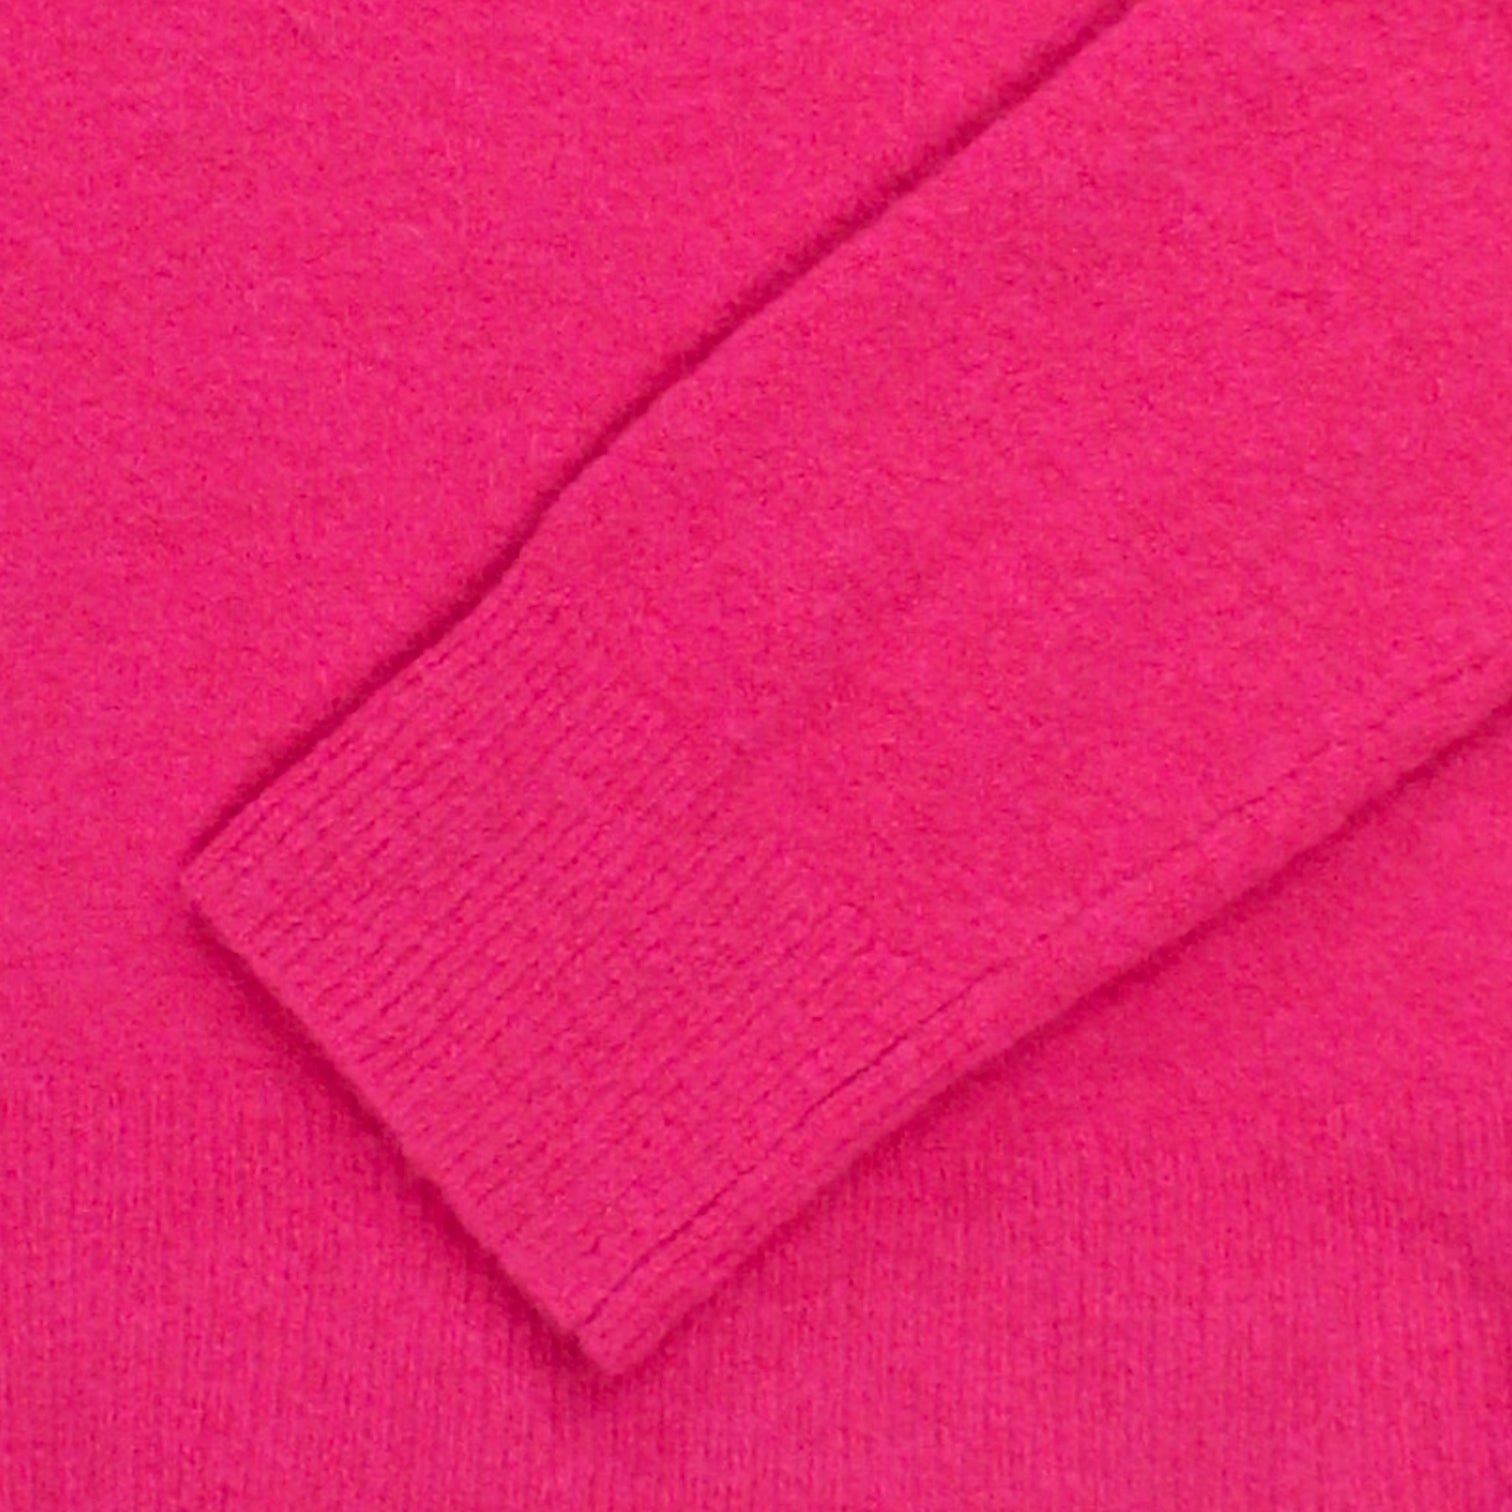 Hush Bright Pink Cropped Knit Jumper